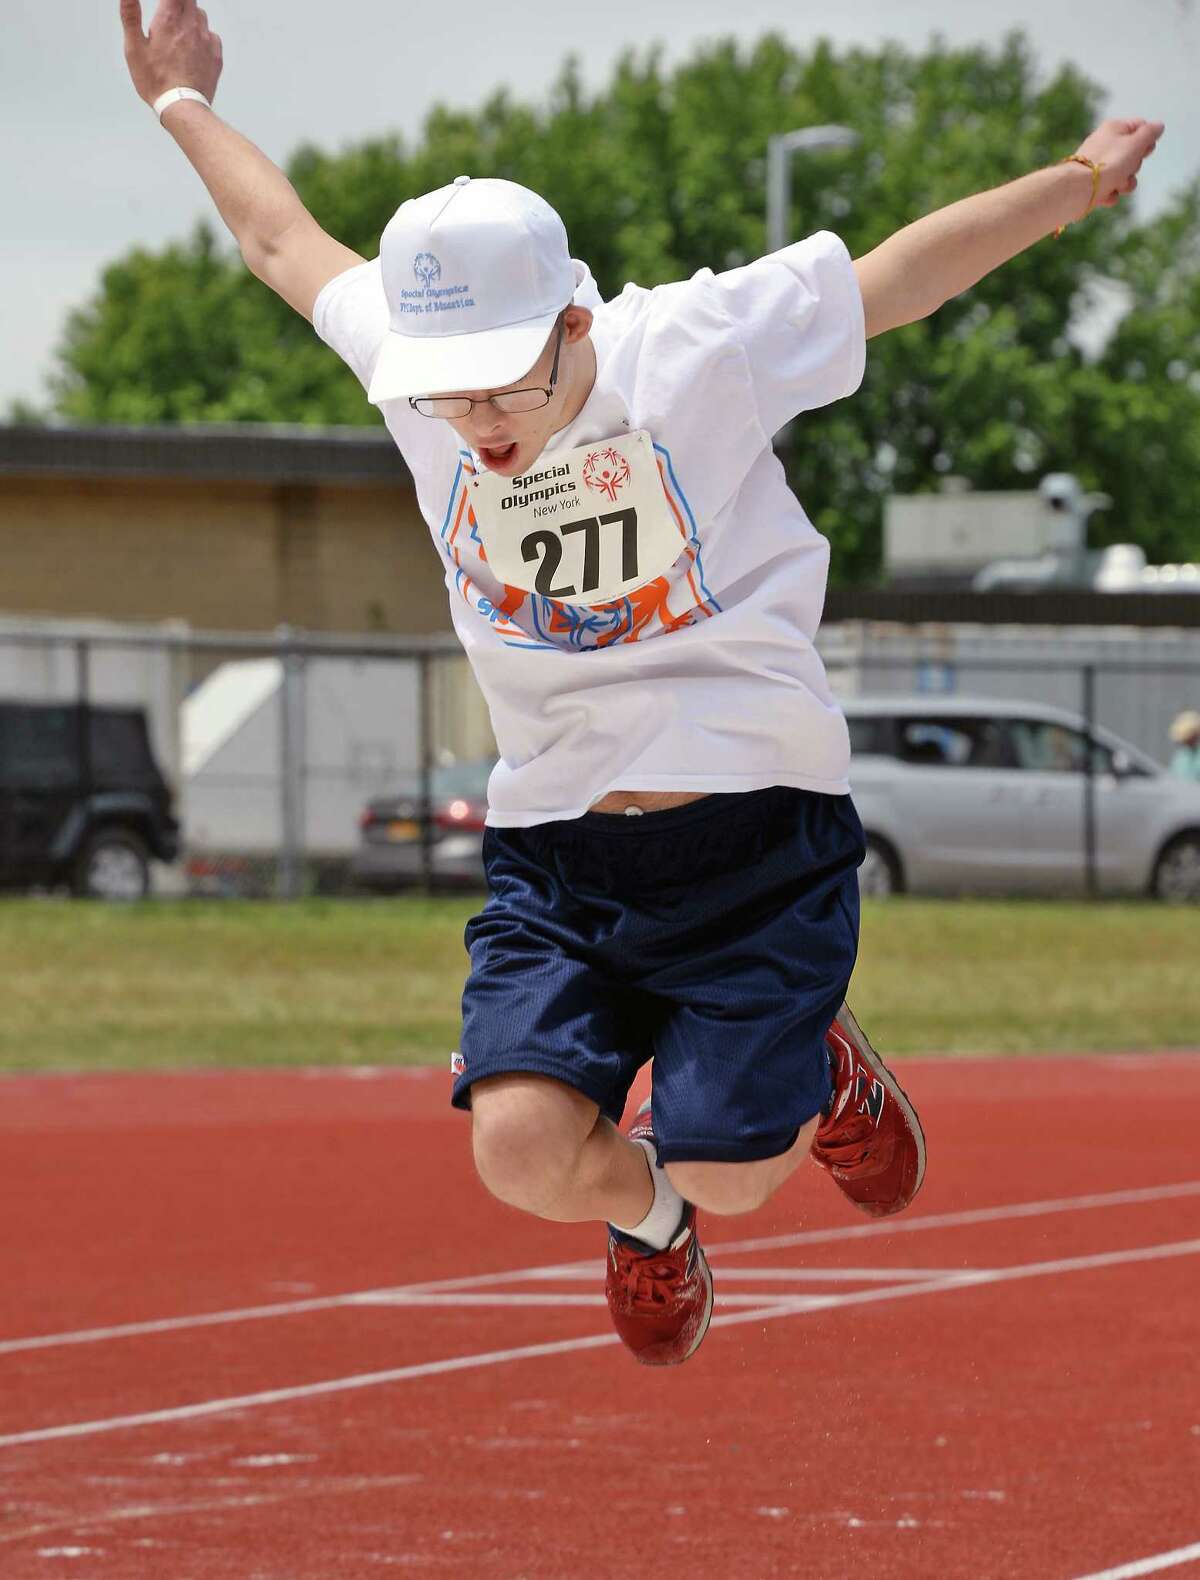 Paul Florian of Manhattan competes in the standing long jump during the Special Olympics New York at Hudson Valley Community College Saturday June 17, 2017 in Troy, NY. (John Carl D'Annibale / Times Union)